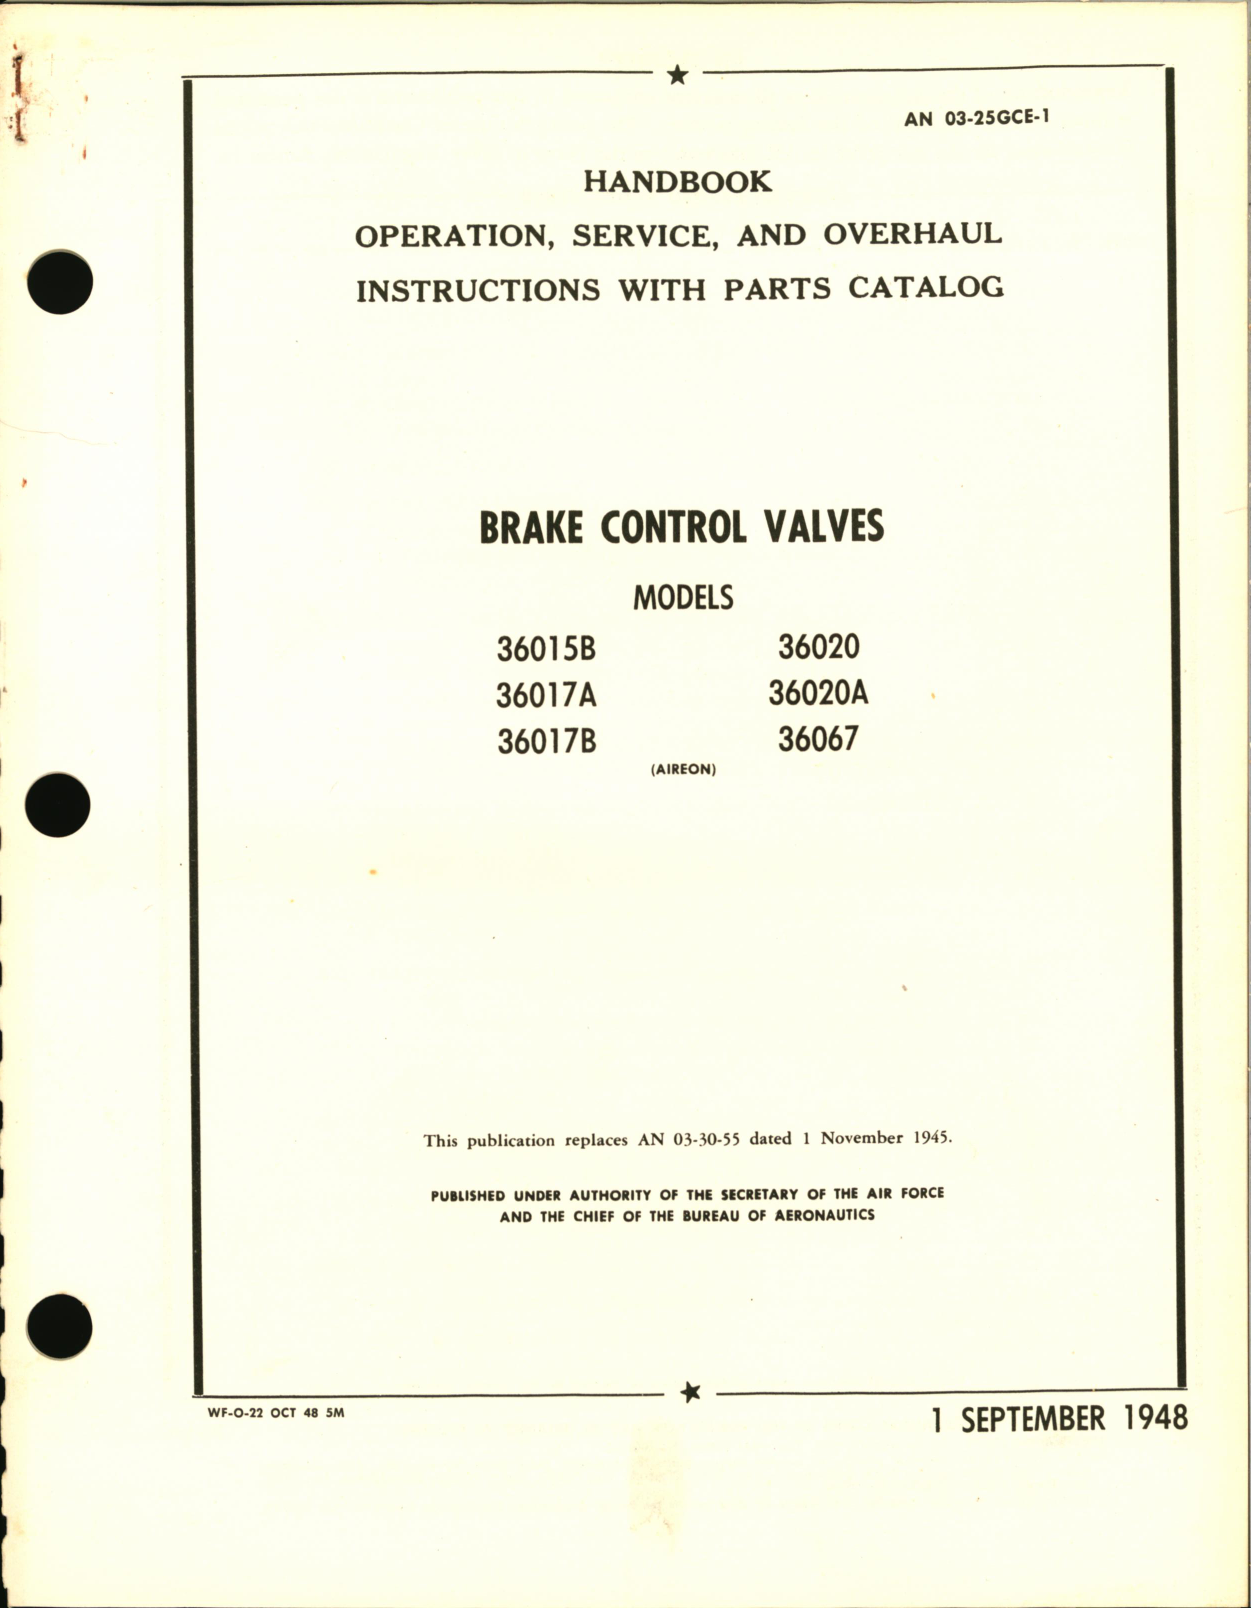 Sample page 1 from AirCorps Library document: Operation, Service, & Overhaul Instructions with Parts Catalog for Brake Control Valves